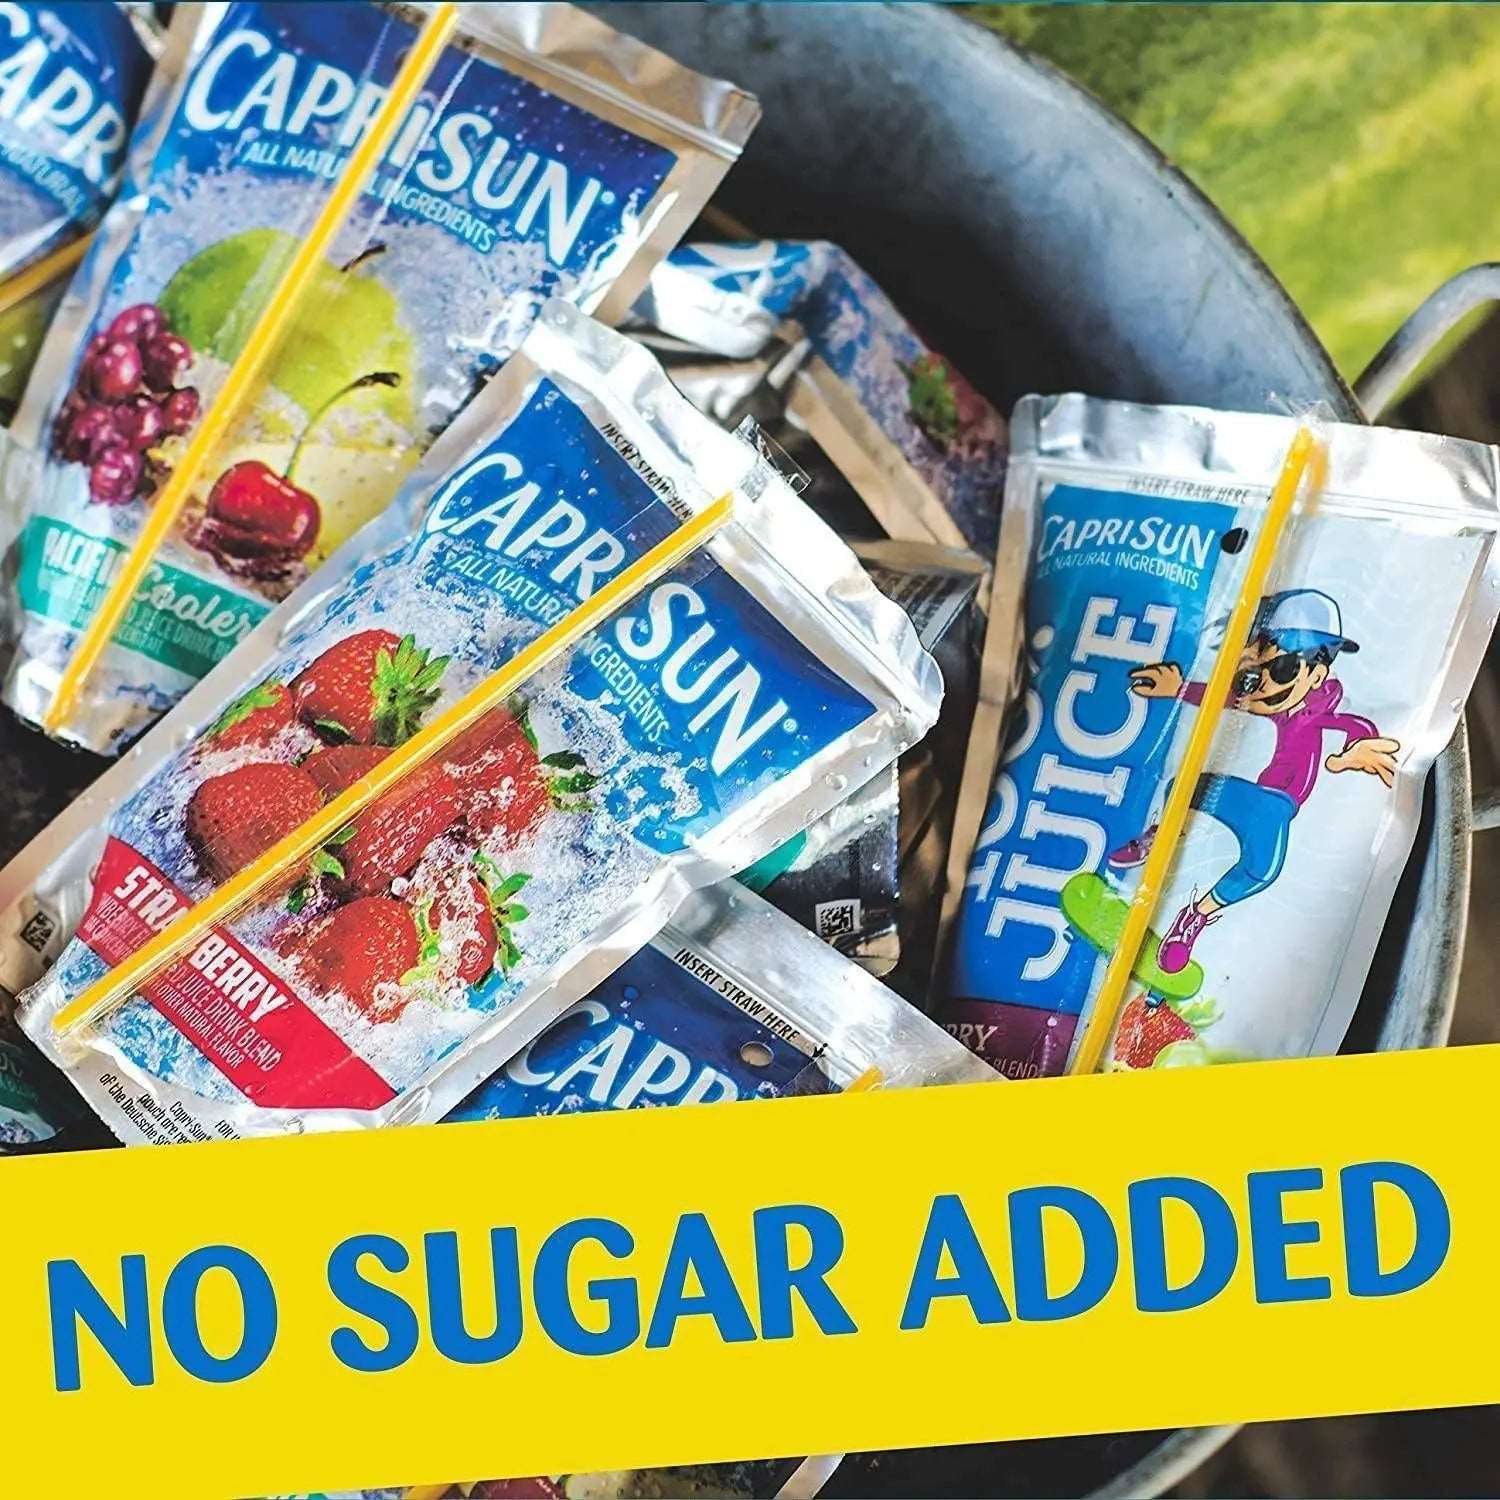 Wholesale prices with free shipping all over United States Capri Sun 100% Juice Variety Pack (40 ct.) - Steven Deals